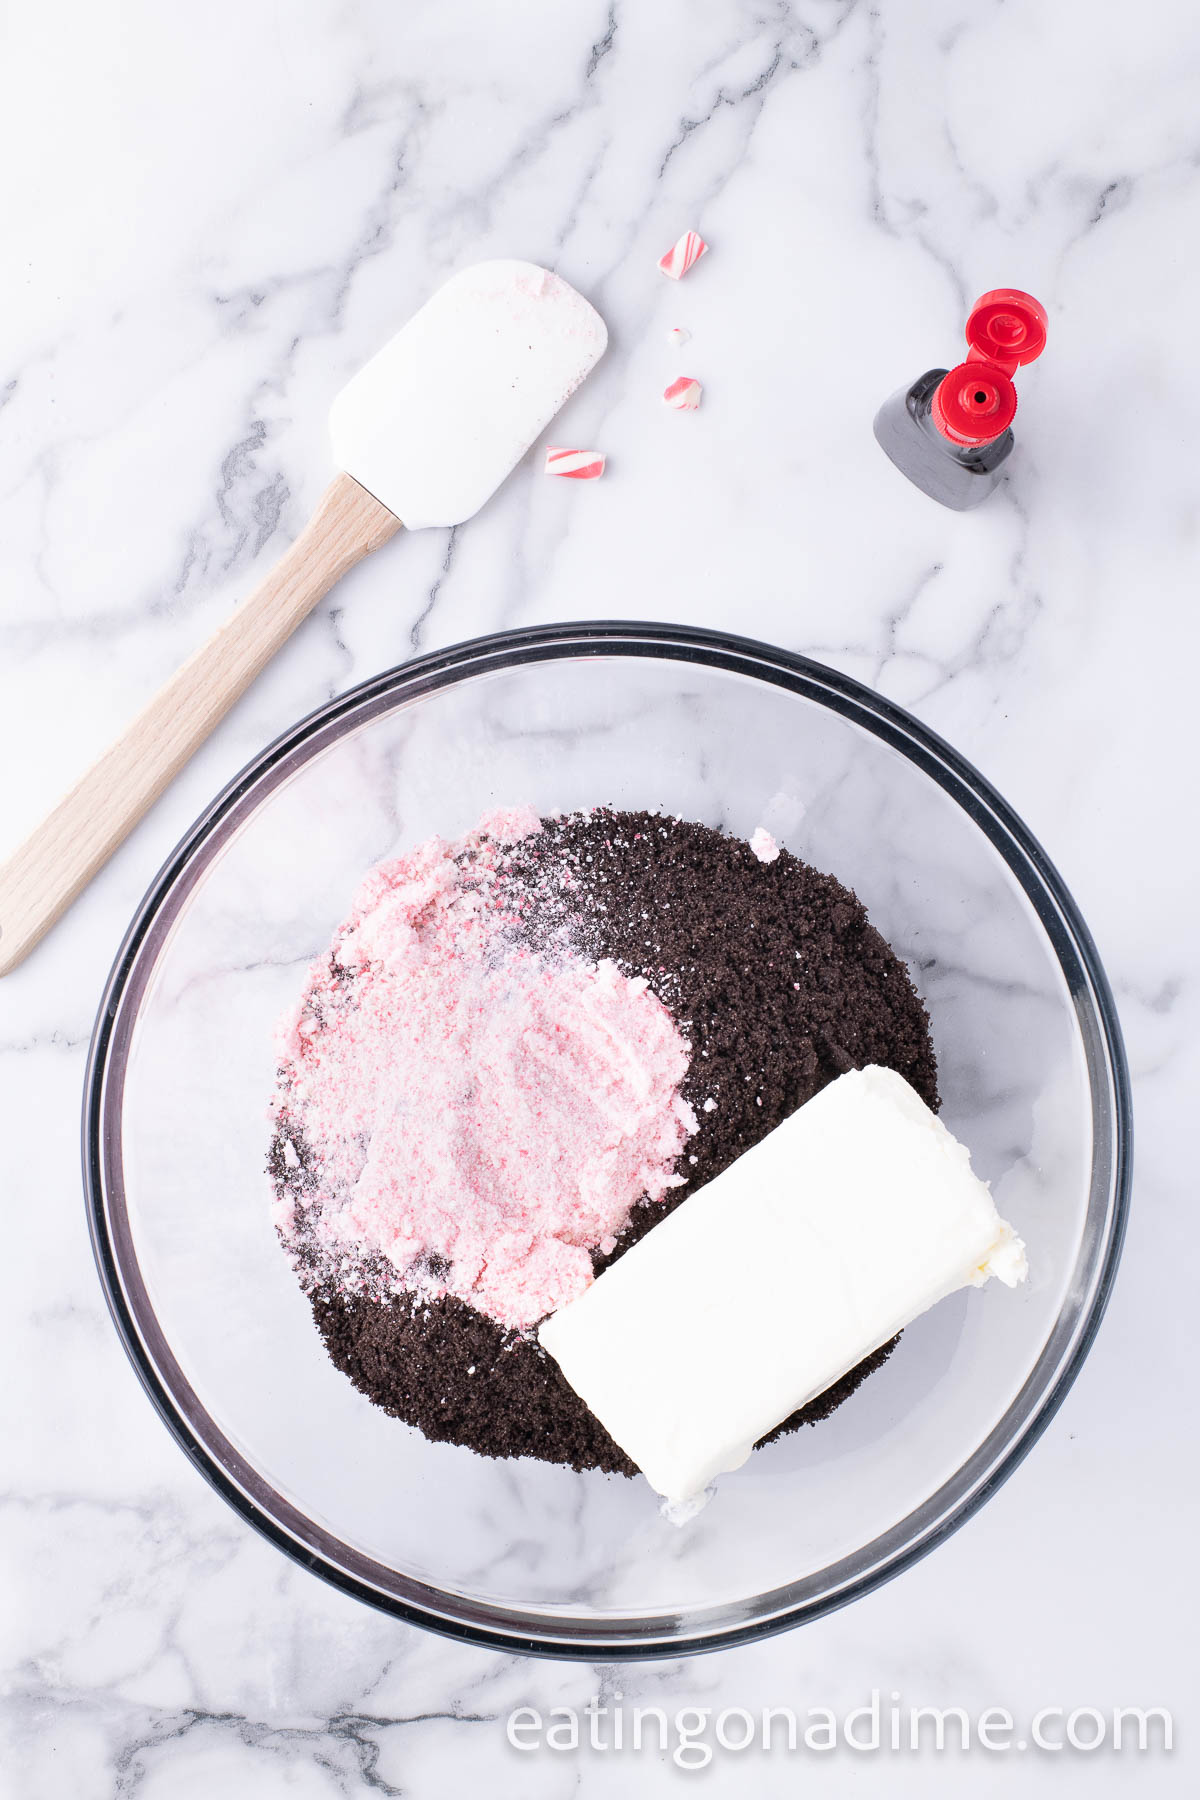 Combining the crushed candy canes and cream cheese and crushed Oreos